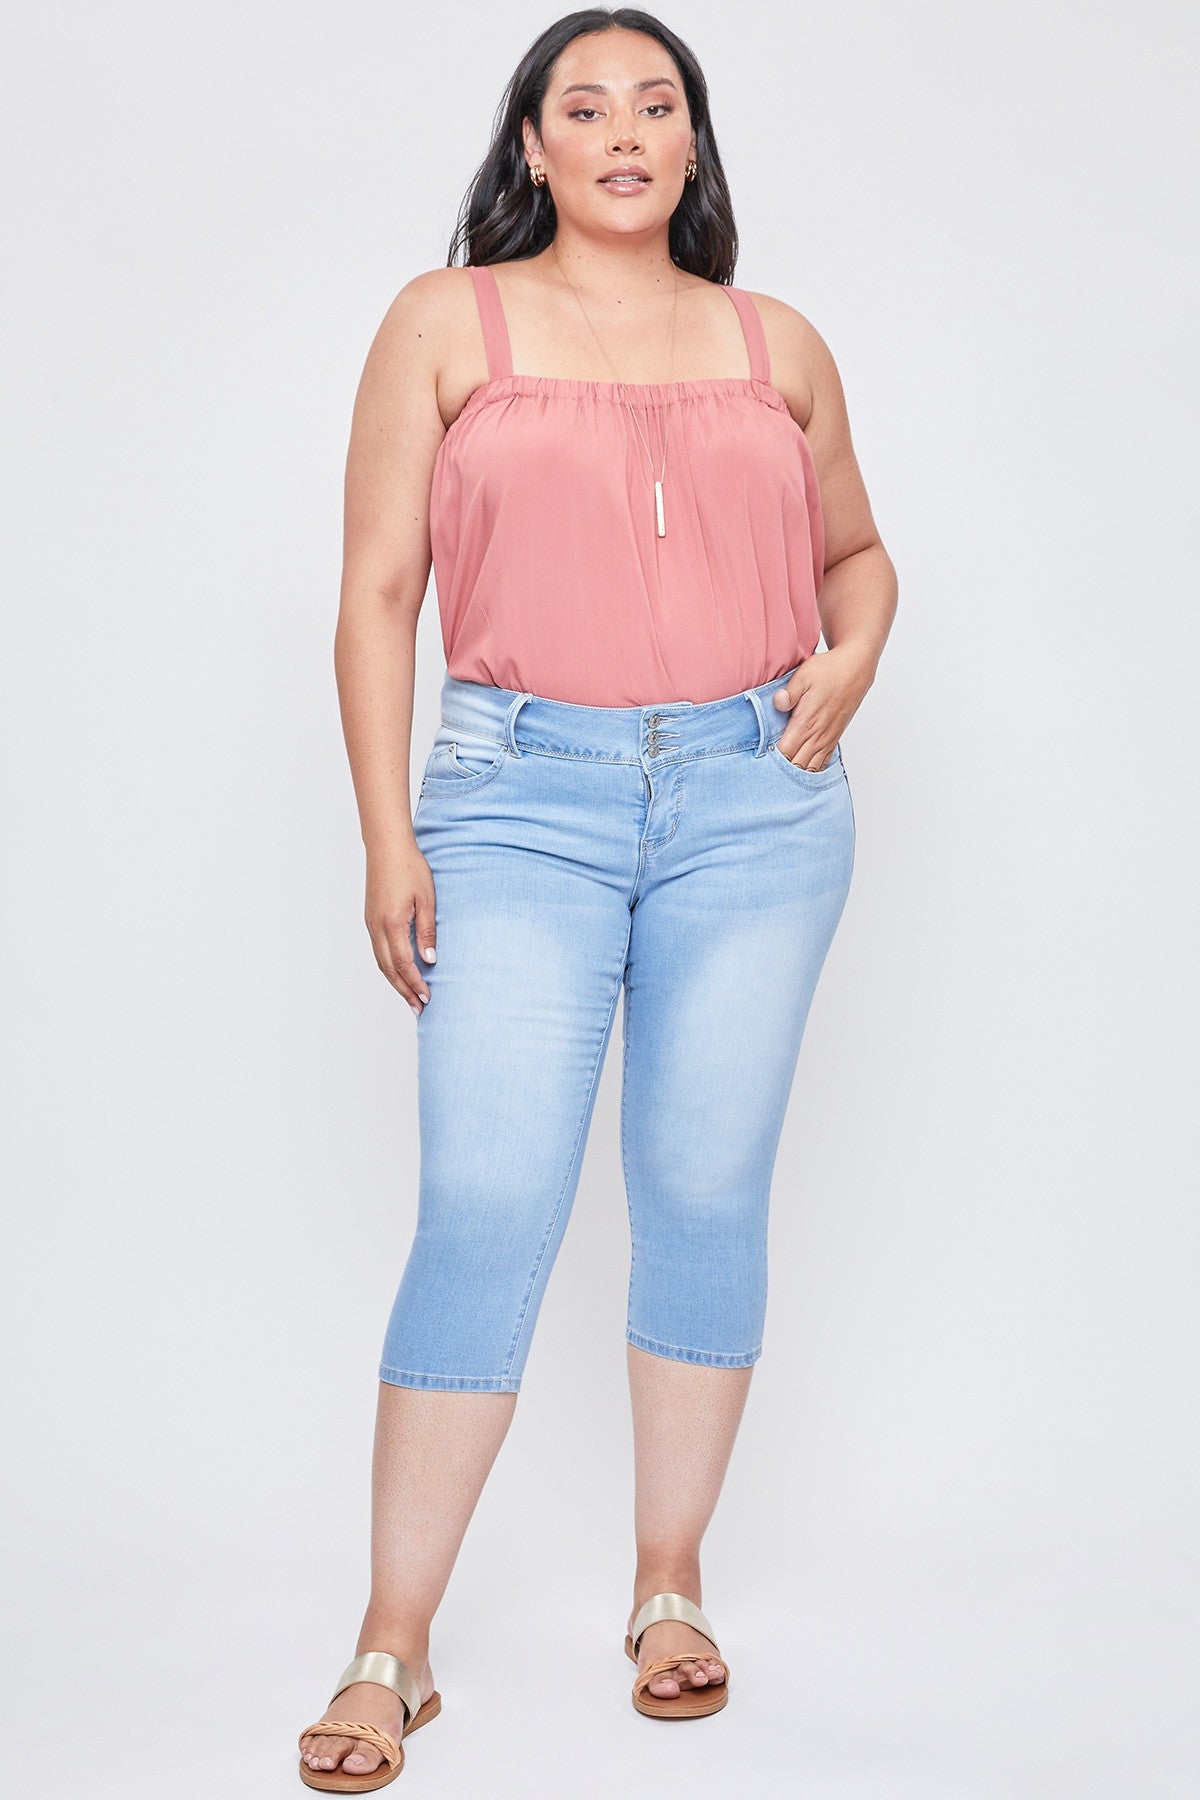 Missy Plus Size Wannabettabutt 3-Button Capri Made With Recycled Fibers Pack Of 12